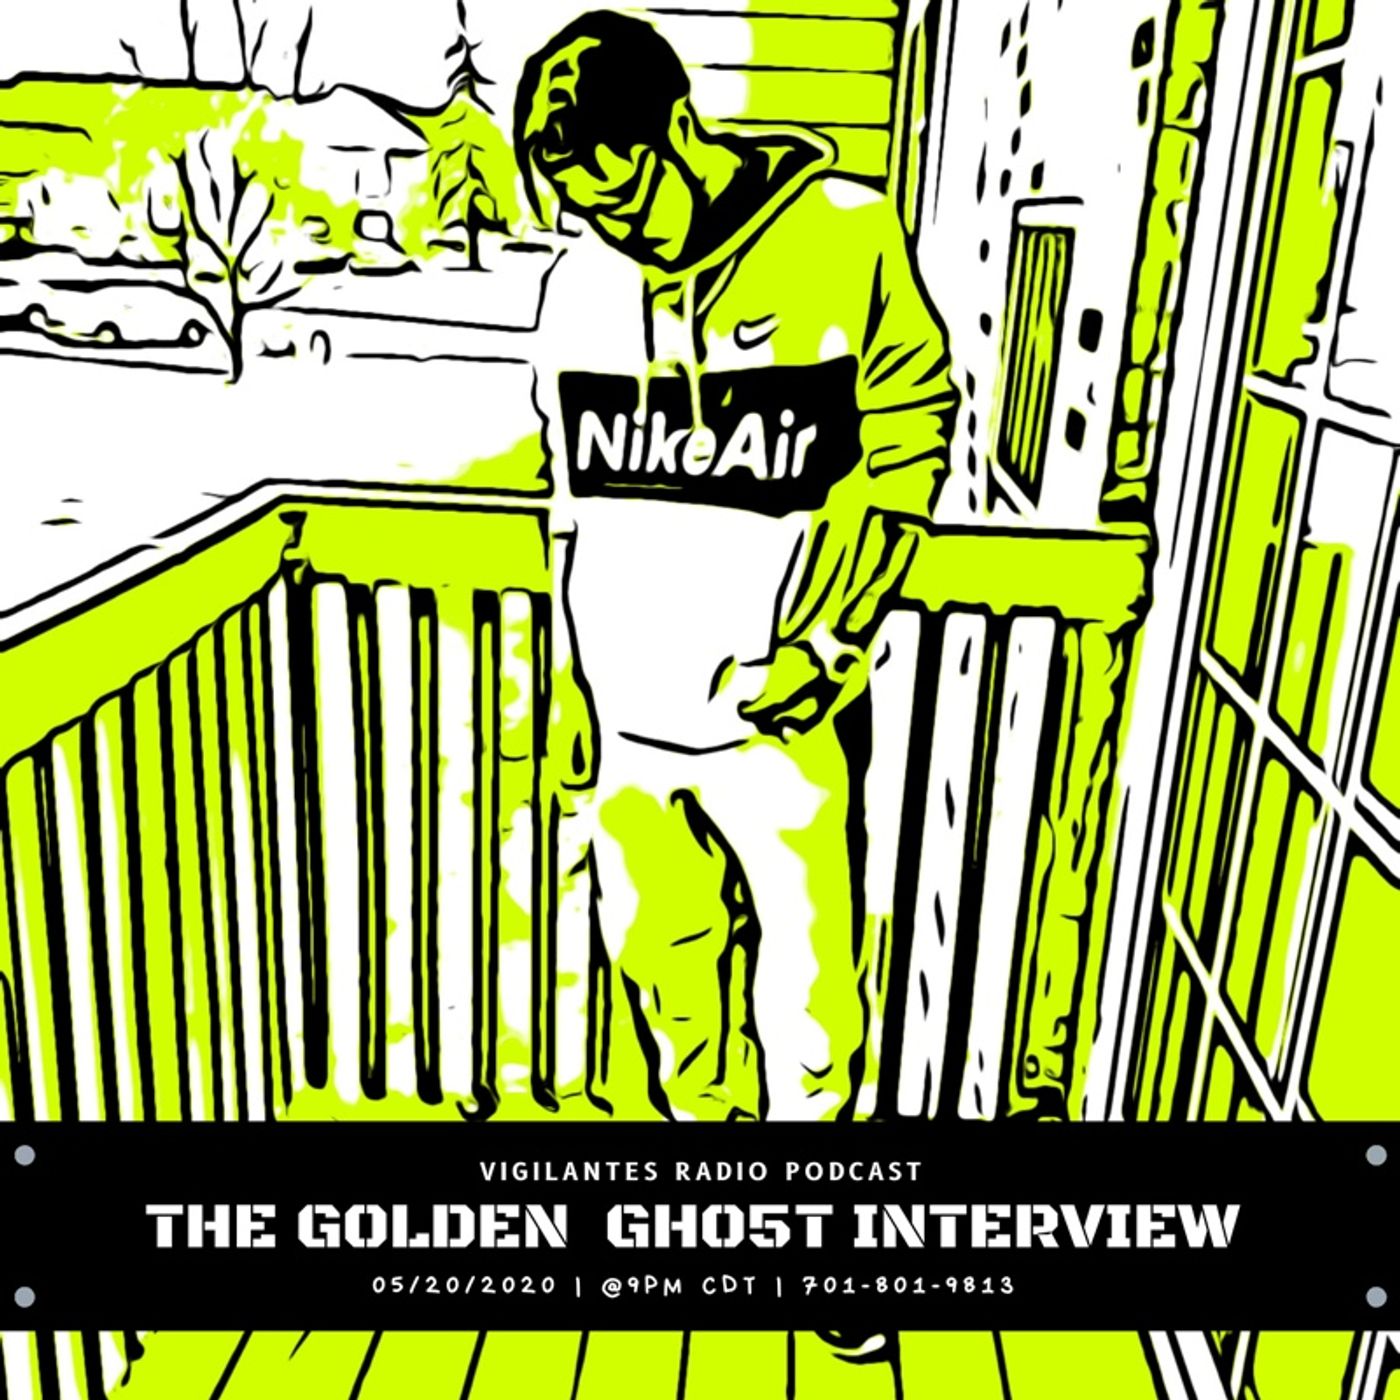 The Golden Gho5t Interview. Image